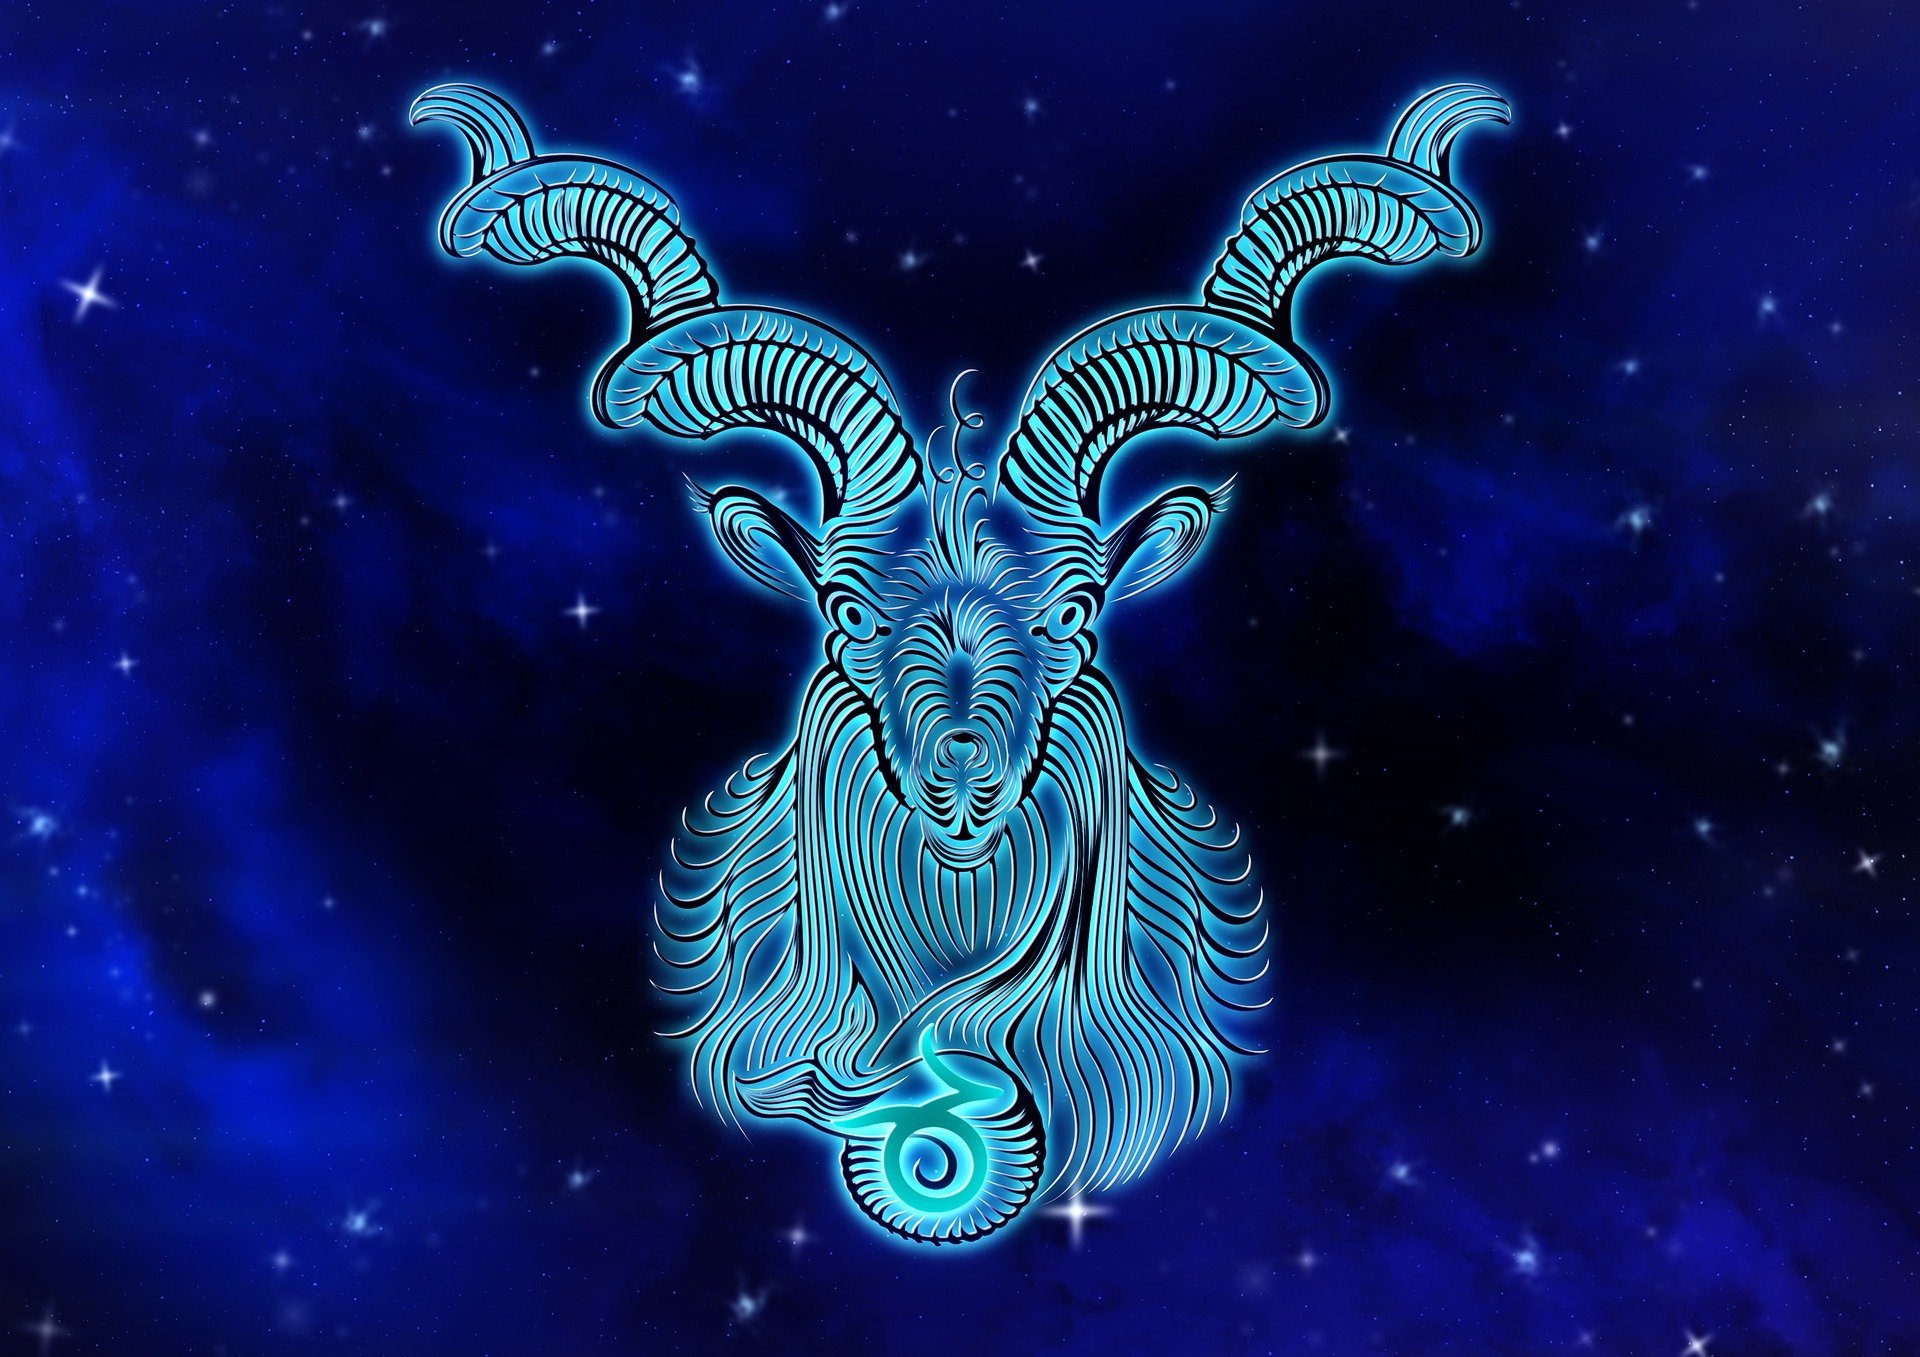 Pictured - A depiction of a Capricorn star sign | Source: Pixabay 